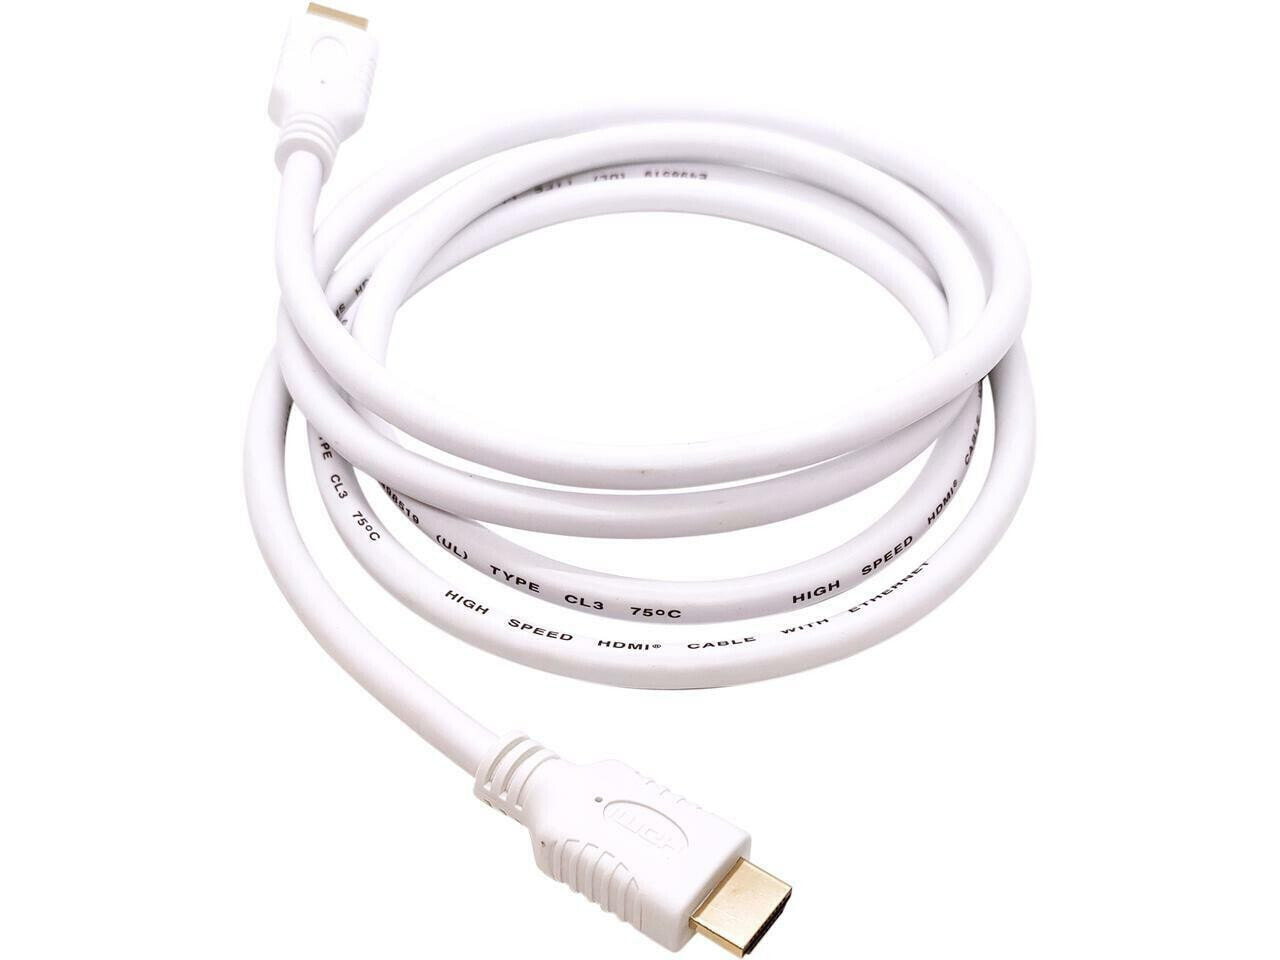 Nippon Labs 4K HDMI Cable 10 ft. - White HDMI 2.0 Cable, Supports 1080p, 3D, 216